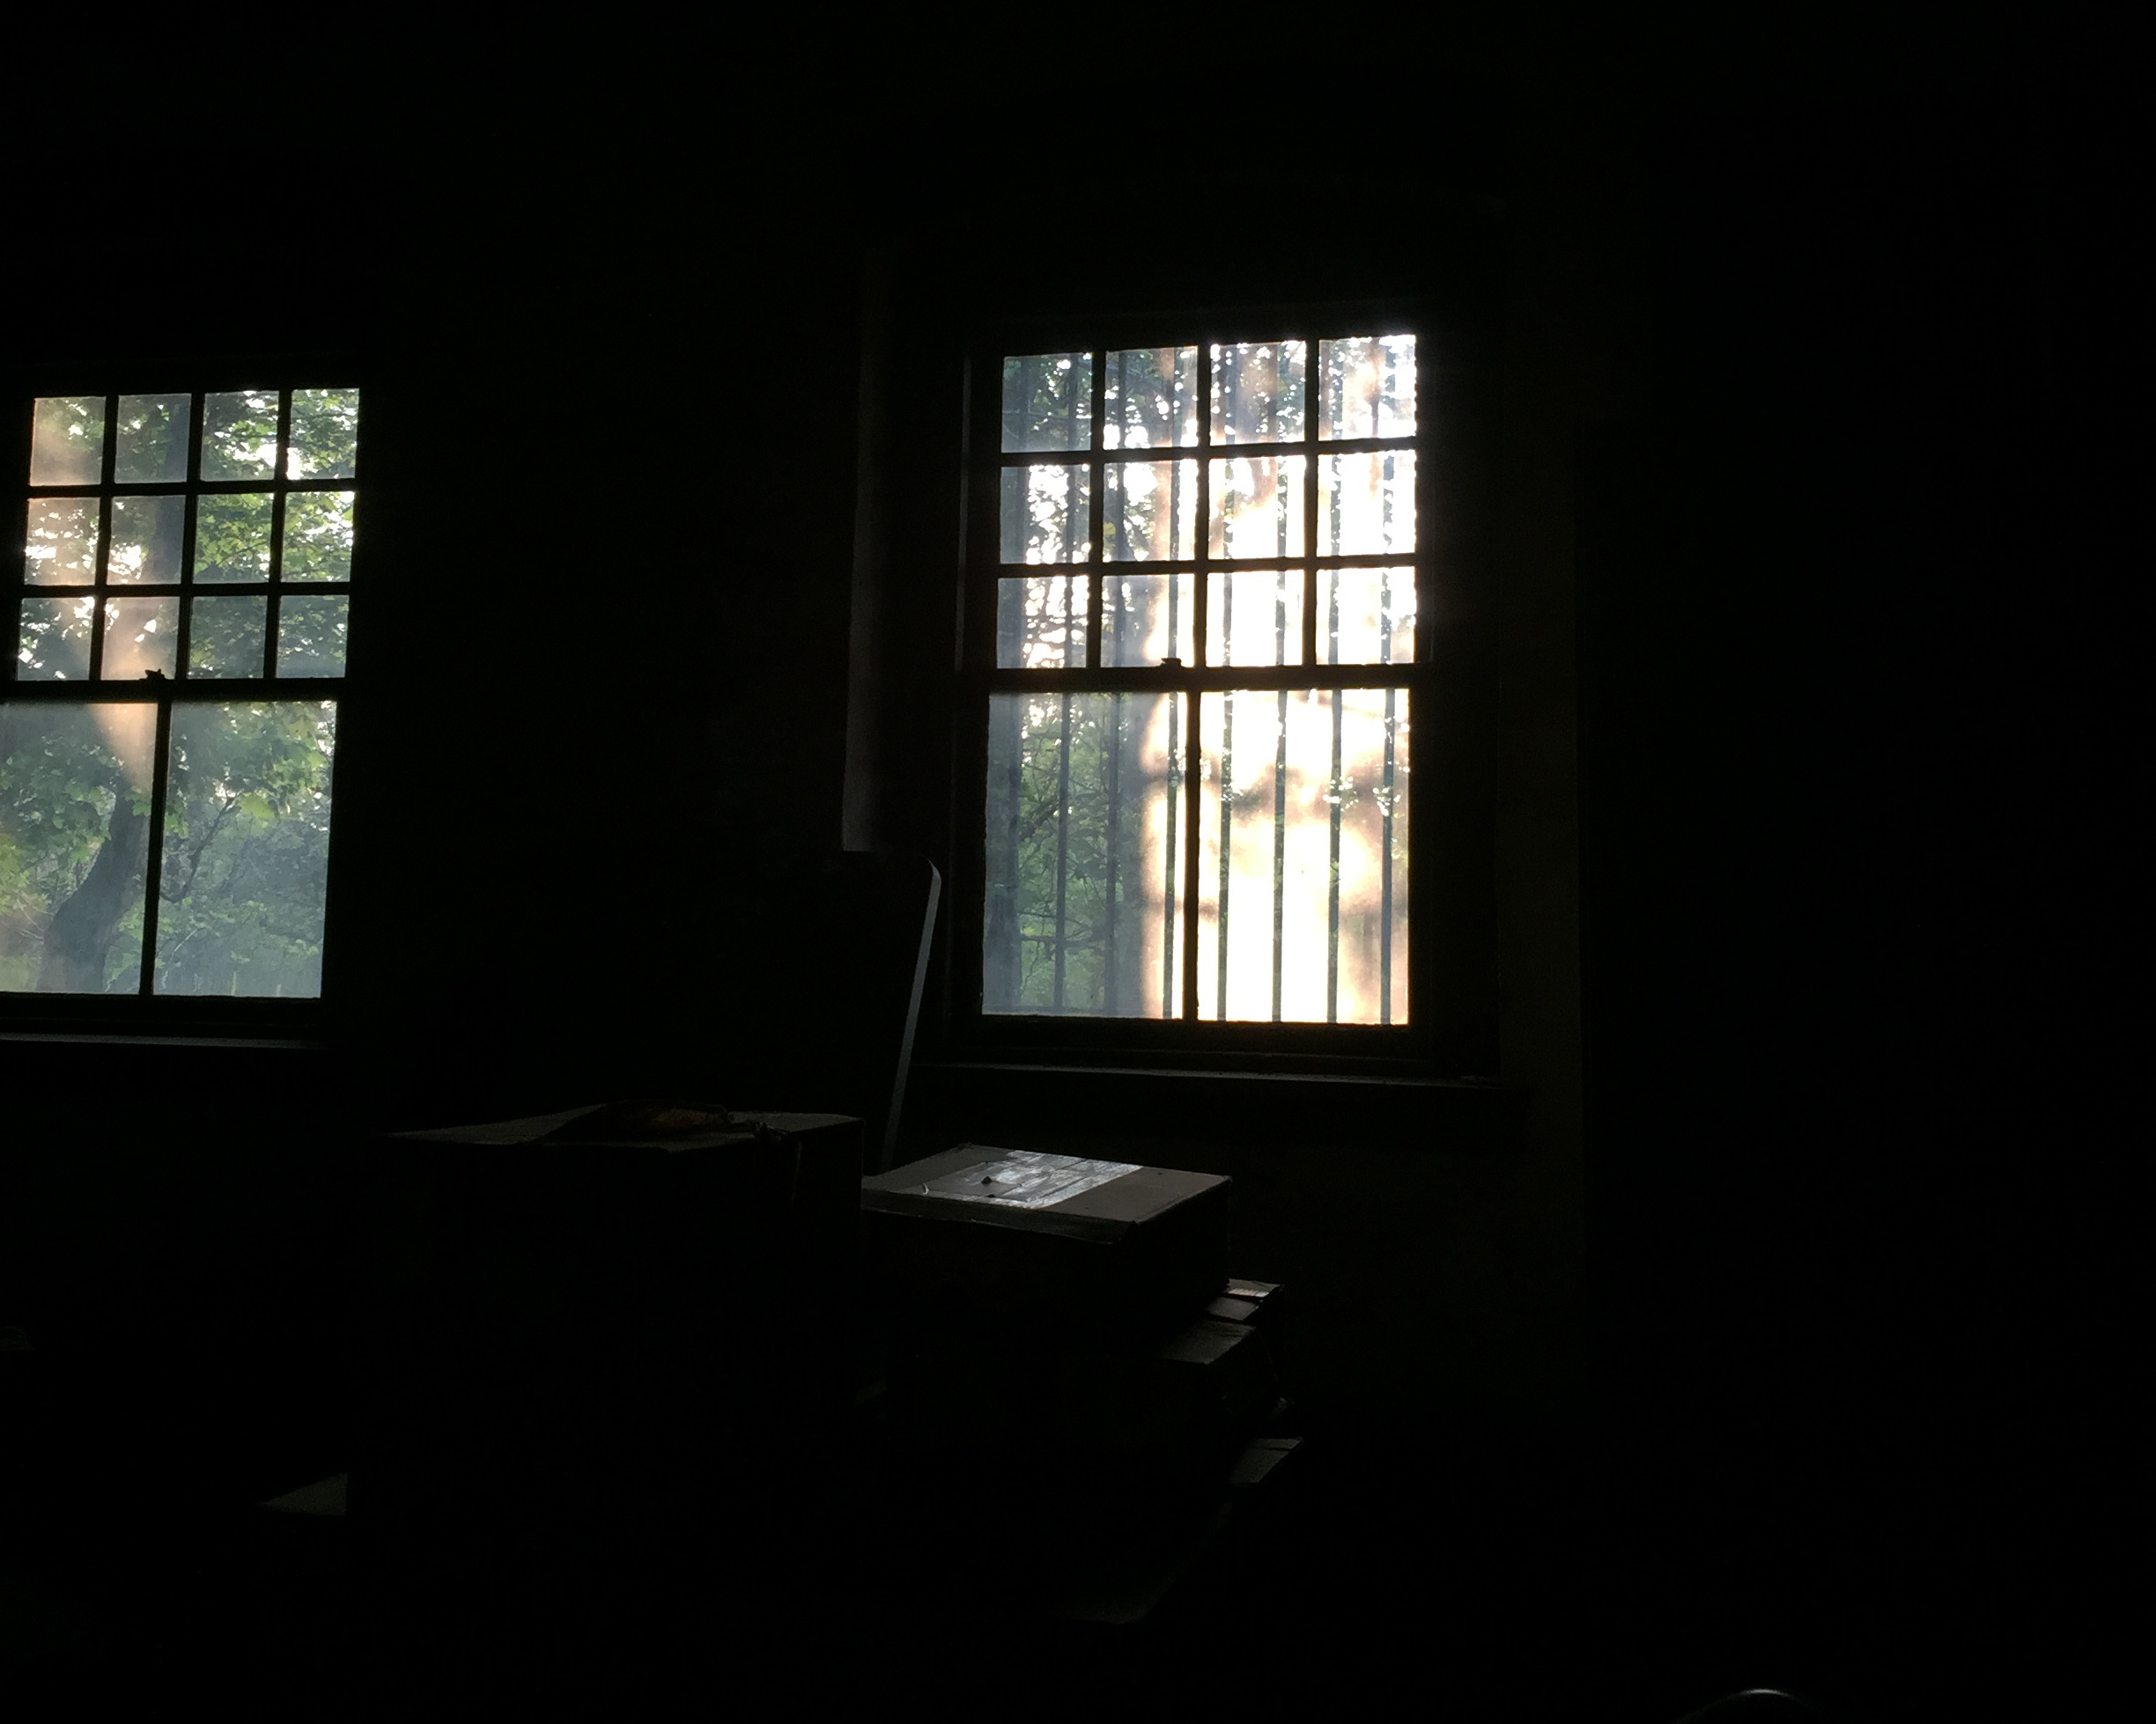  The filtered light through these windows created the shadowy effect that you see in the first two images. 